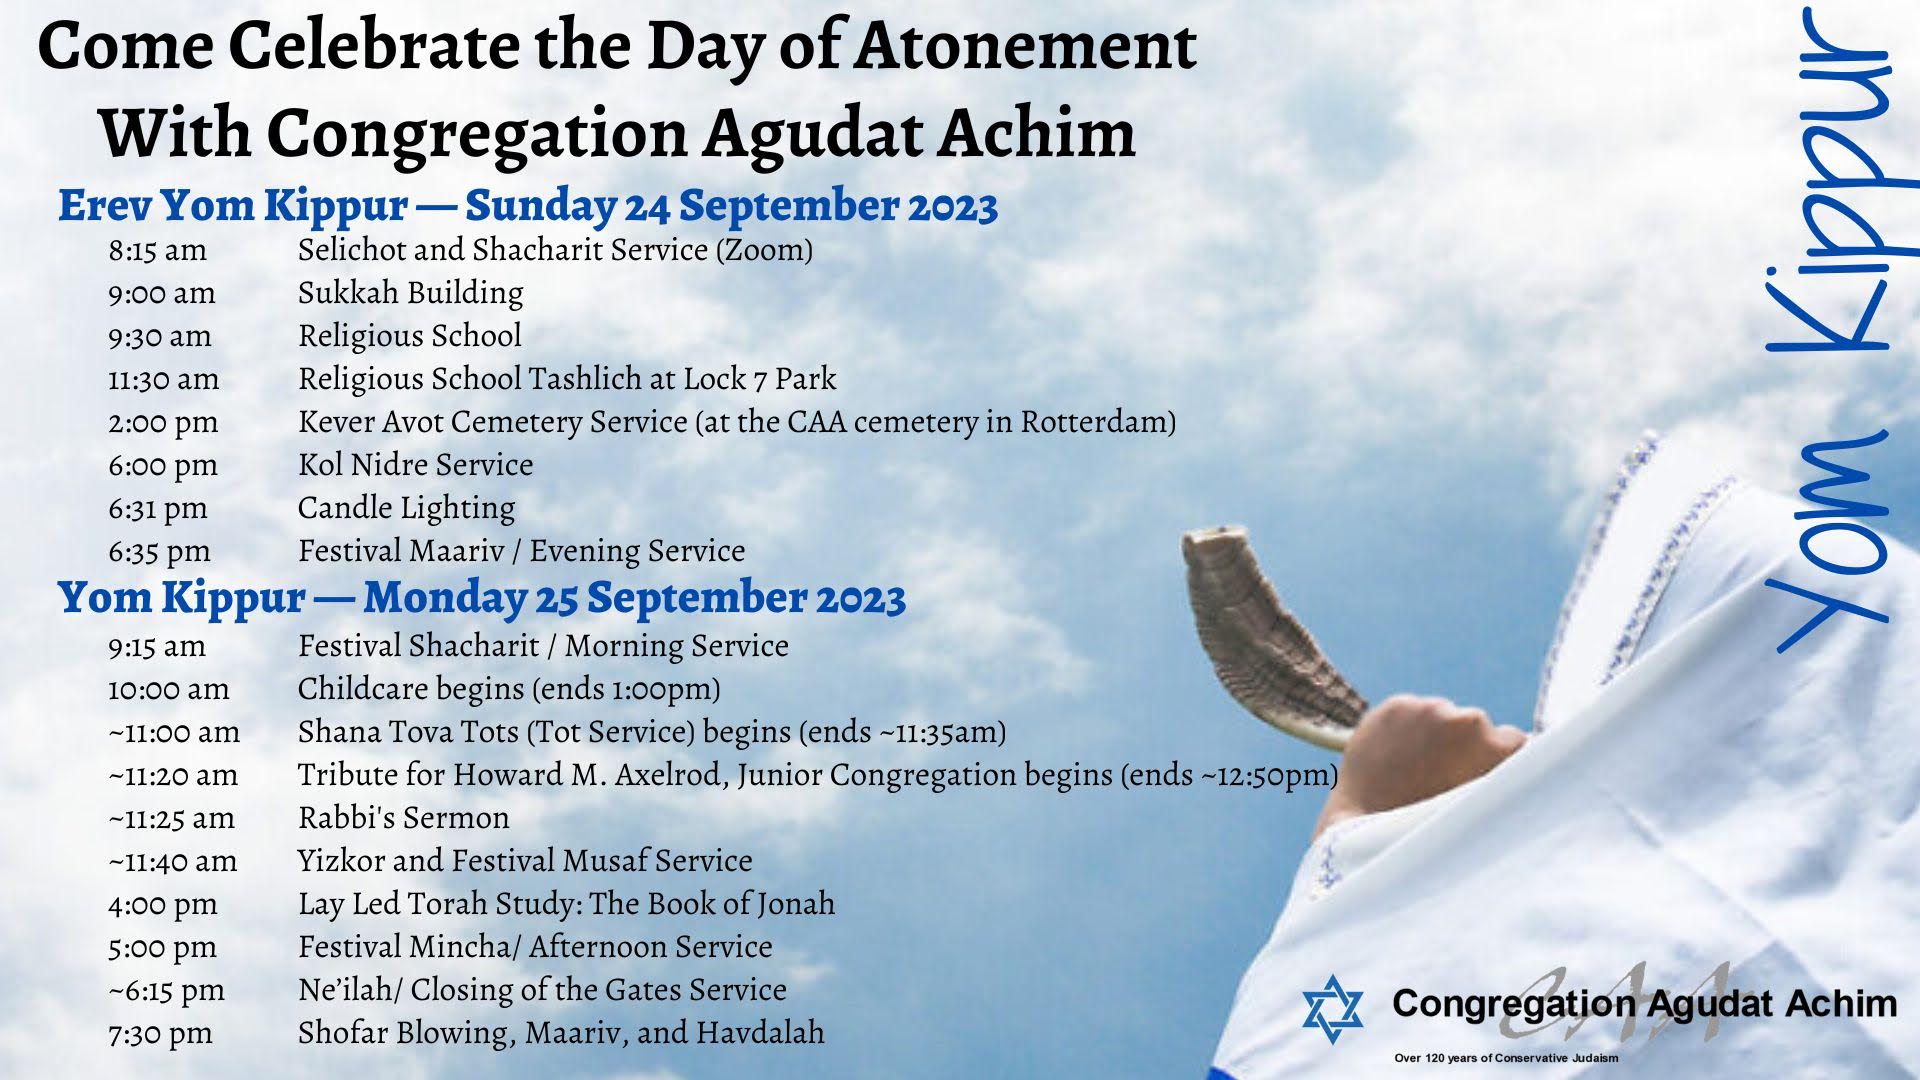 Come Celebrate the Day of Atonement With Congregation Agudat Achim